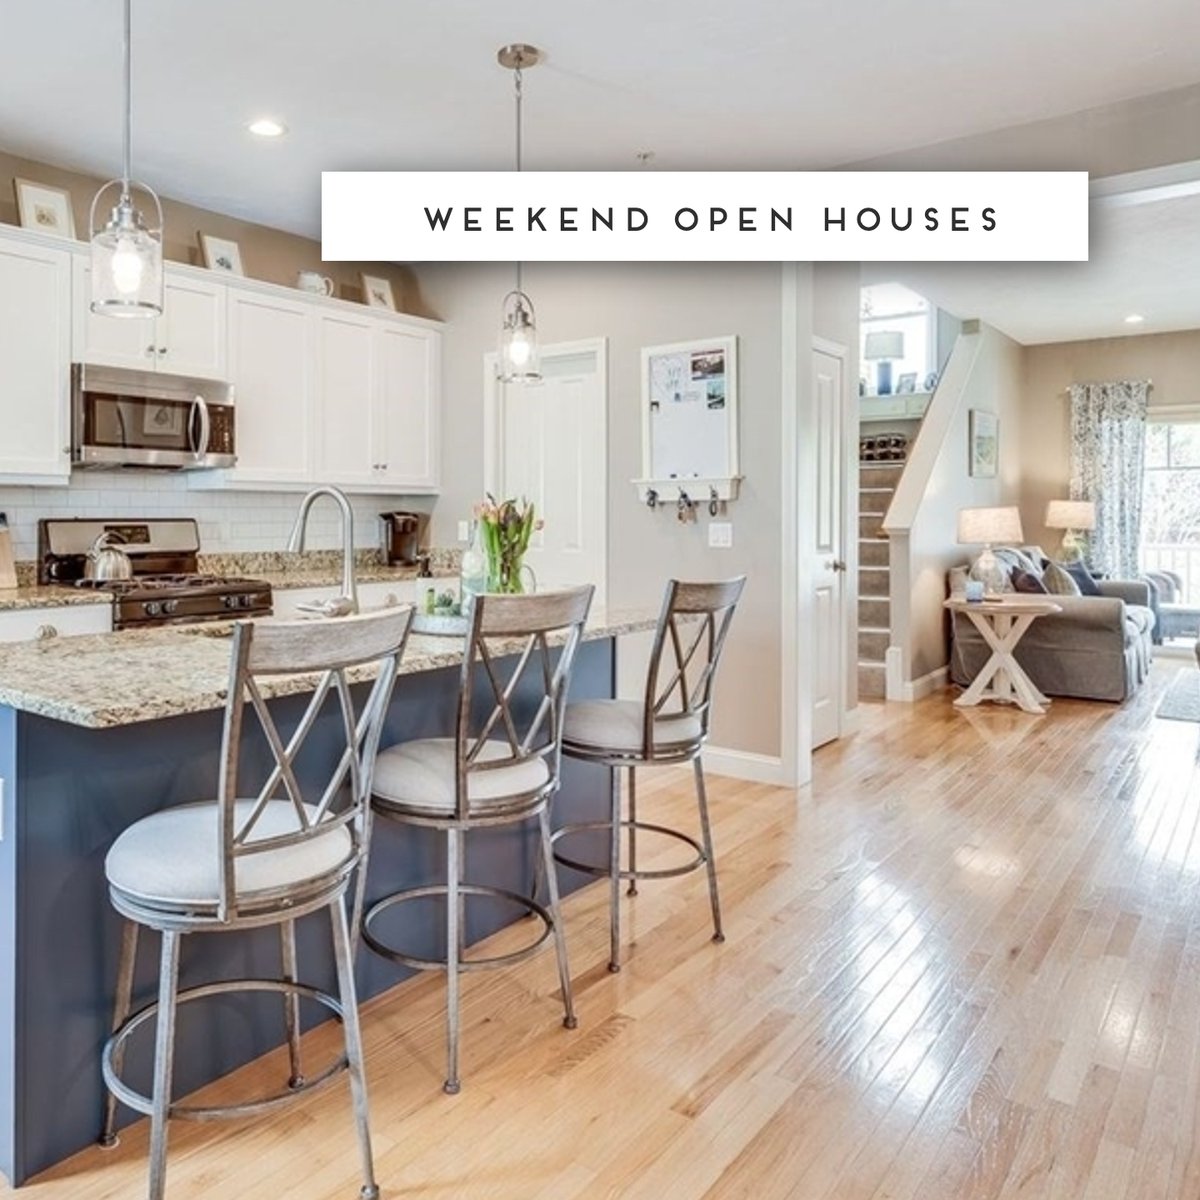 ✨4.18.24 ☆ 🎱 ☆ Weekend Open Houses at The Pinehills, Plymouth, MA. See them at: hubs.ly/Q02tkVQV0 | 508.209.2000 | Start your visit at the Summerhouse, 33 Summerhouse Drive, Plymouth, MA.